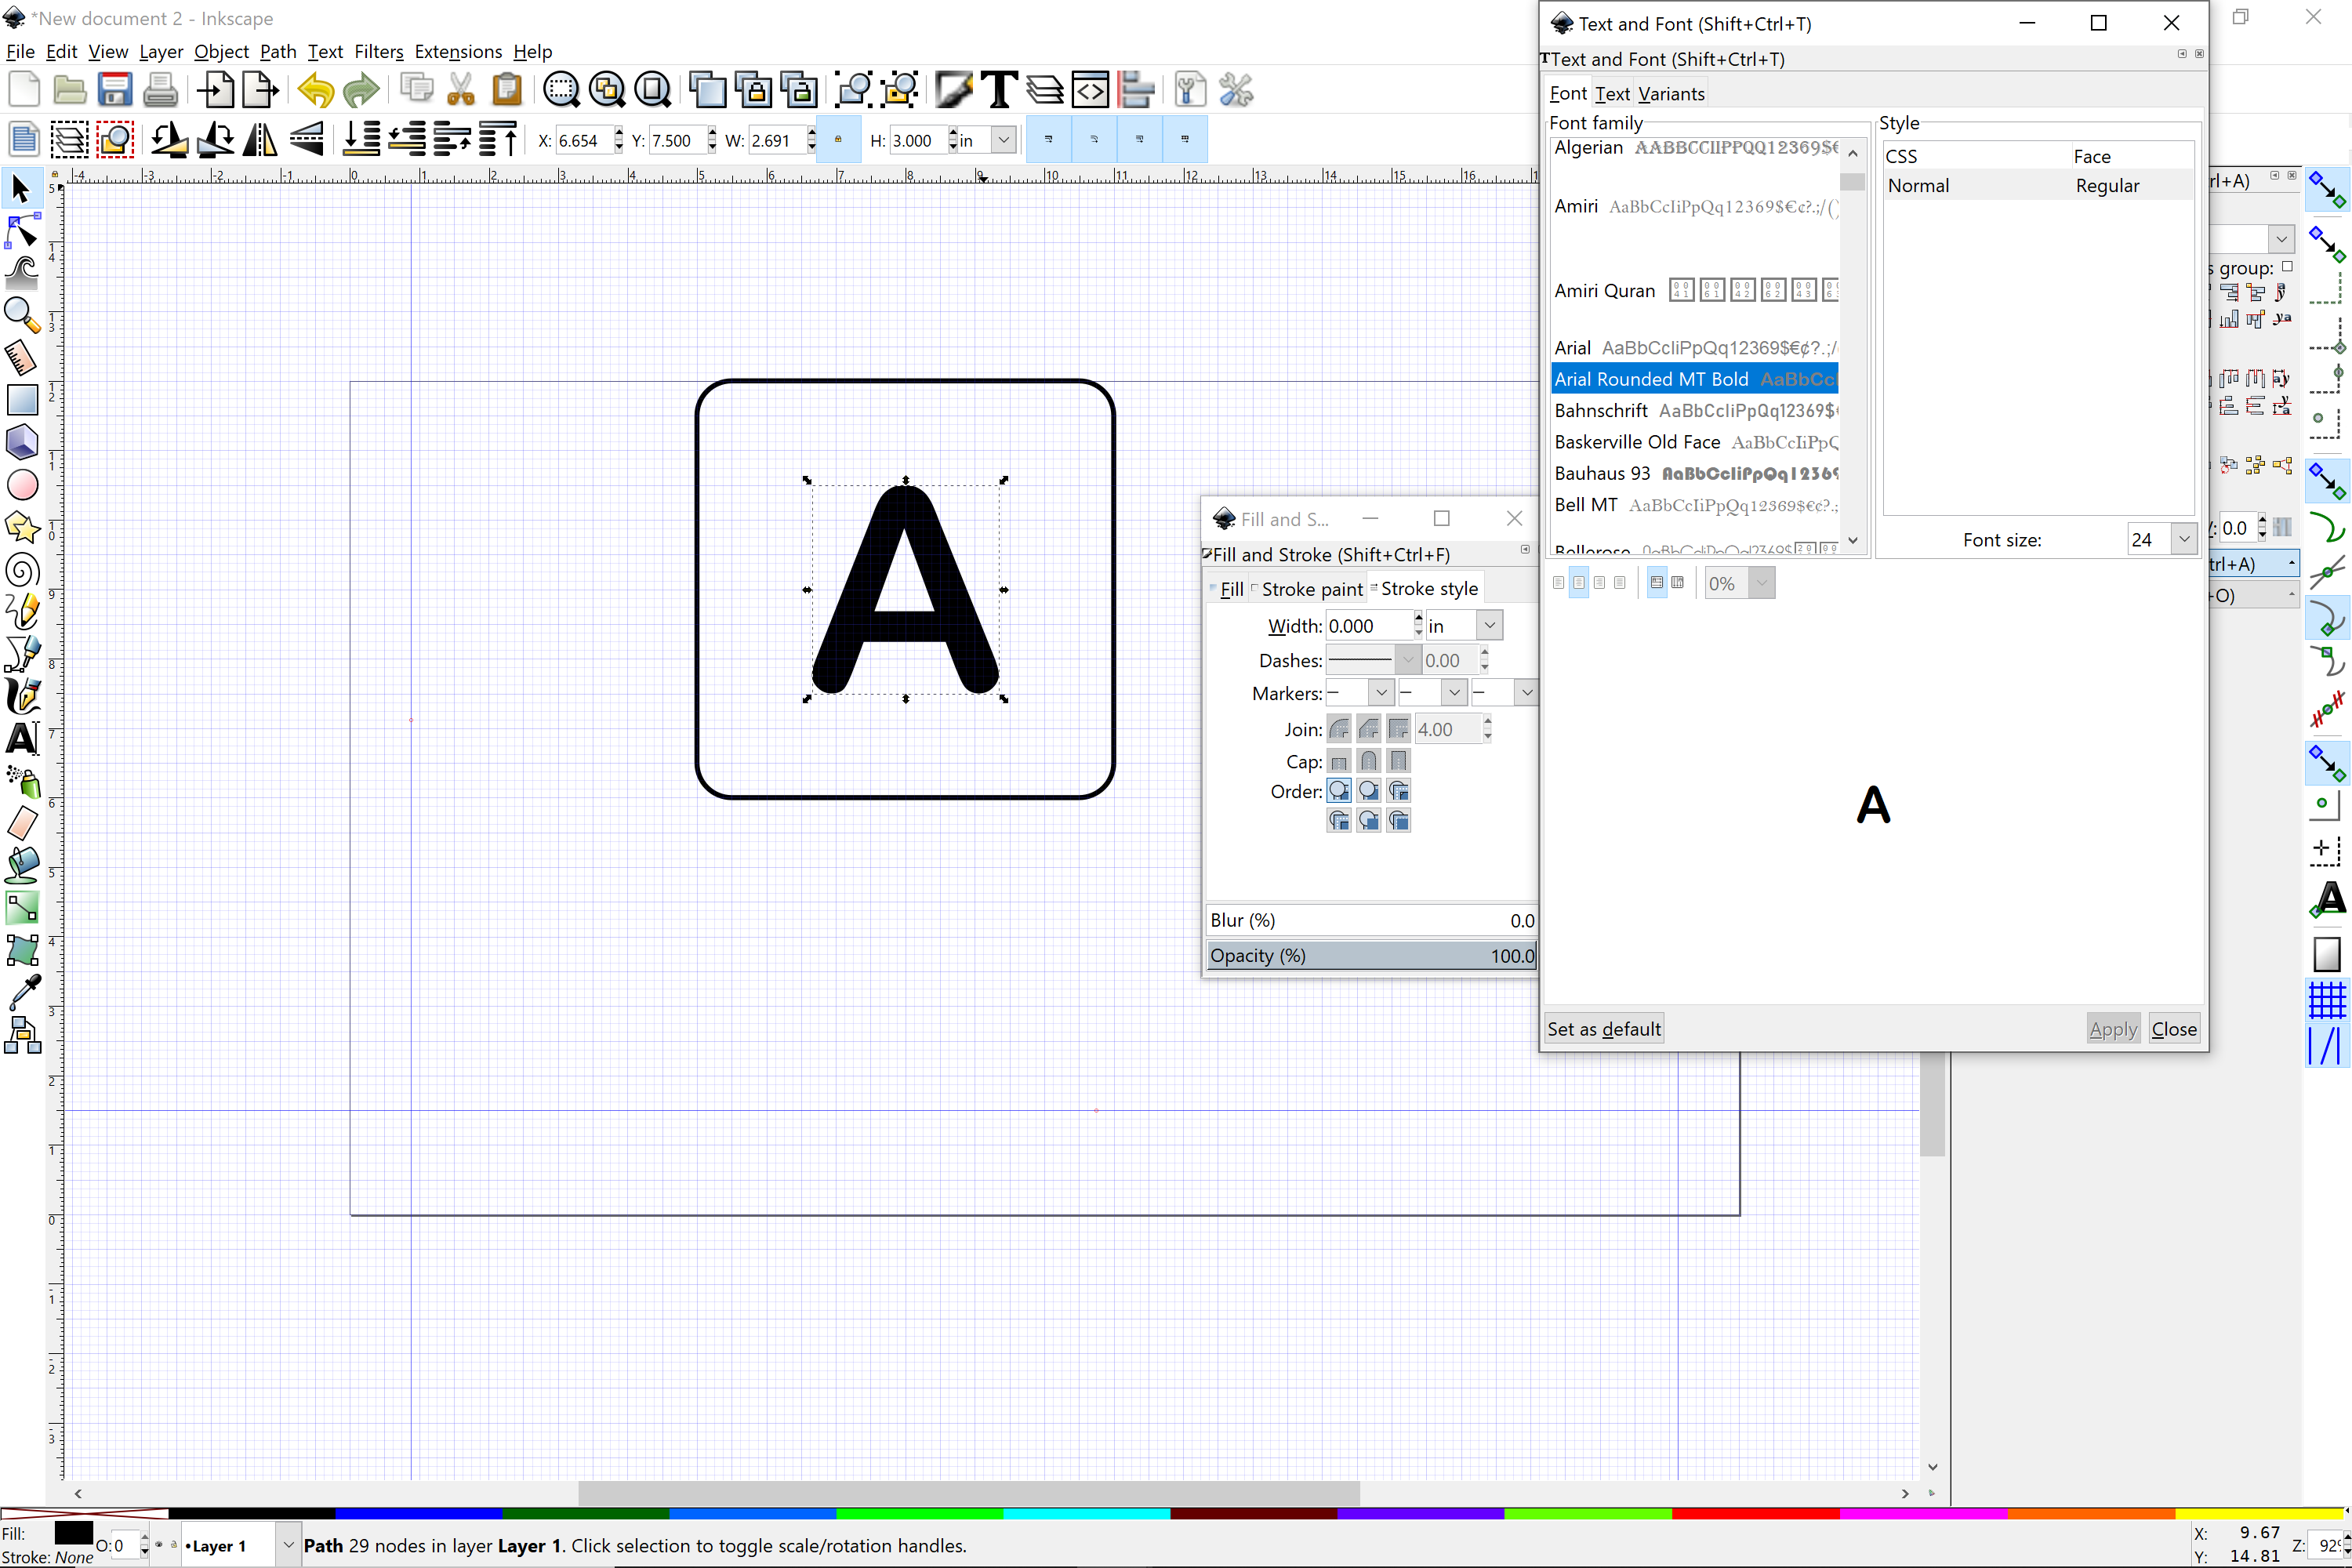 inkscape trace bitmap disappeared